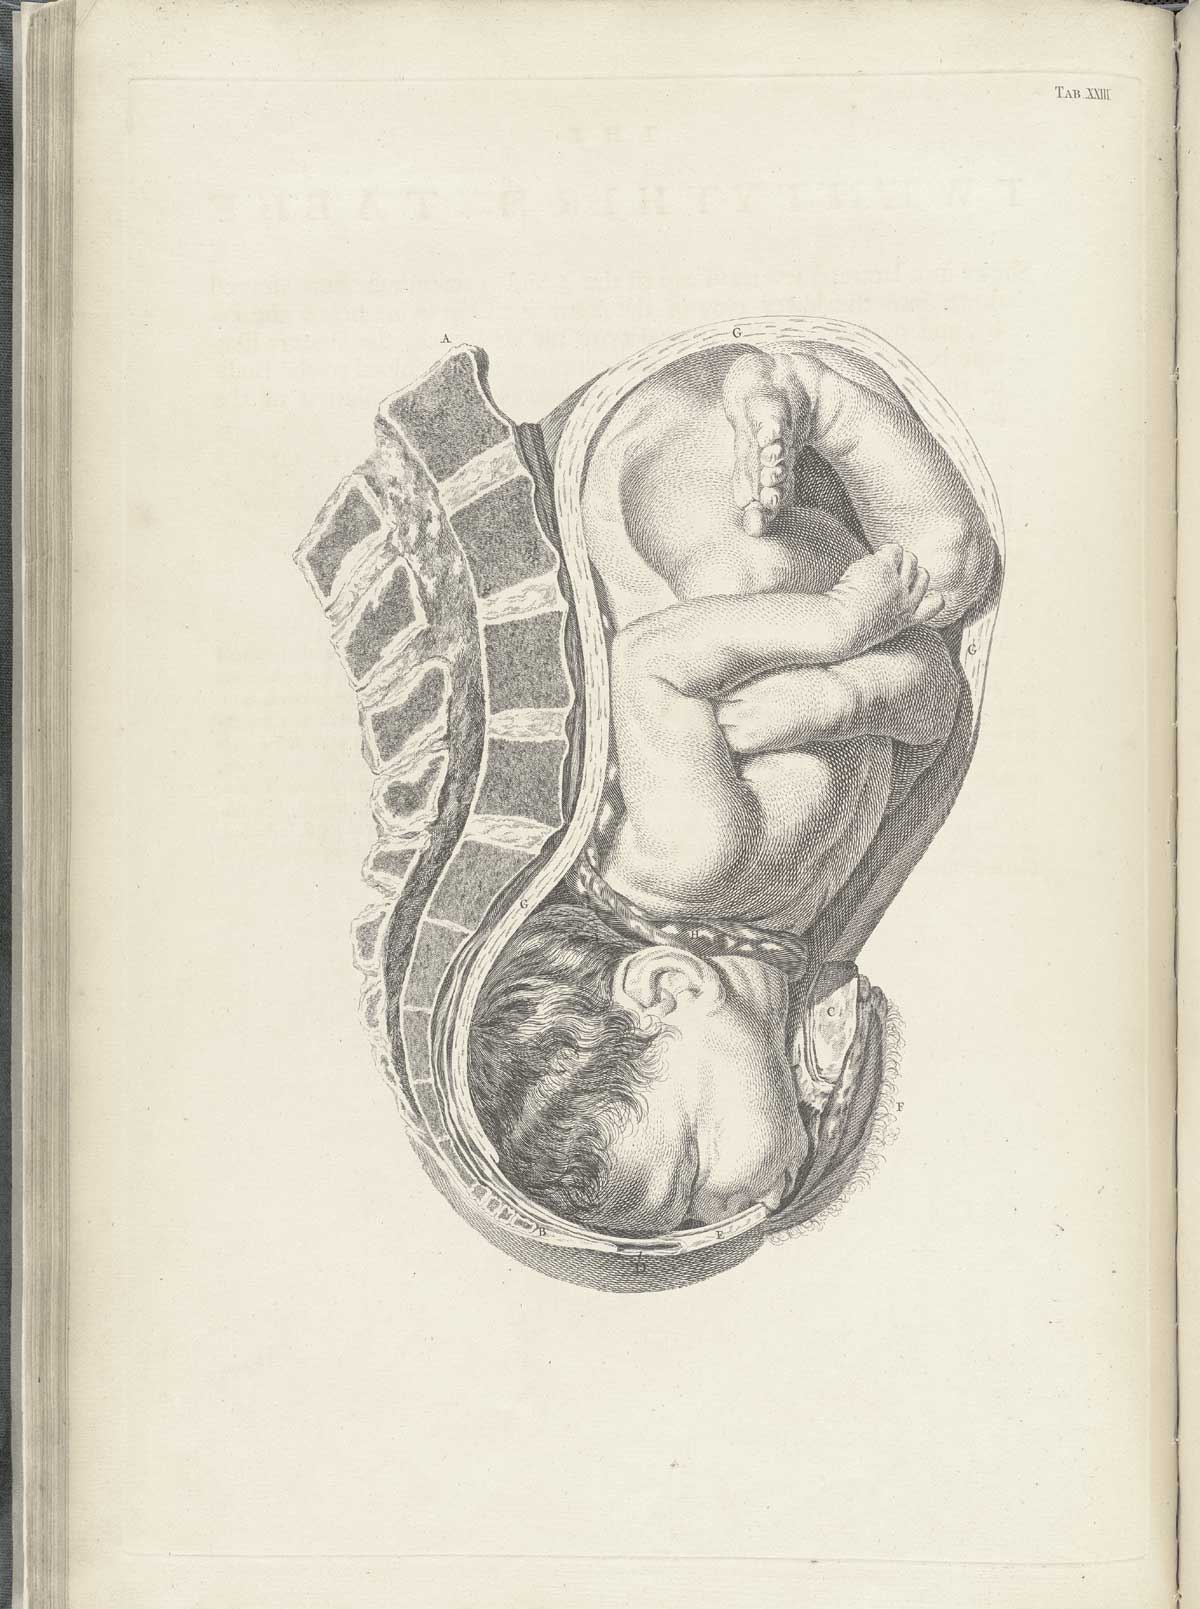 Table 23 of William Smellie's A sett of anatomical tables, with explanations, and an abridgment, of the practice of midwifery, featuring the illustrated drawing of a woman's uterus with a fetus resting against the spine, the imbilical cord is wrapped around its neck.